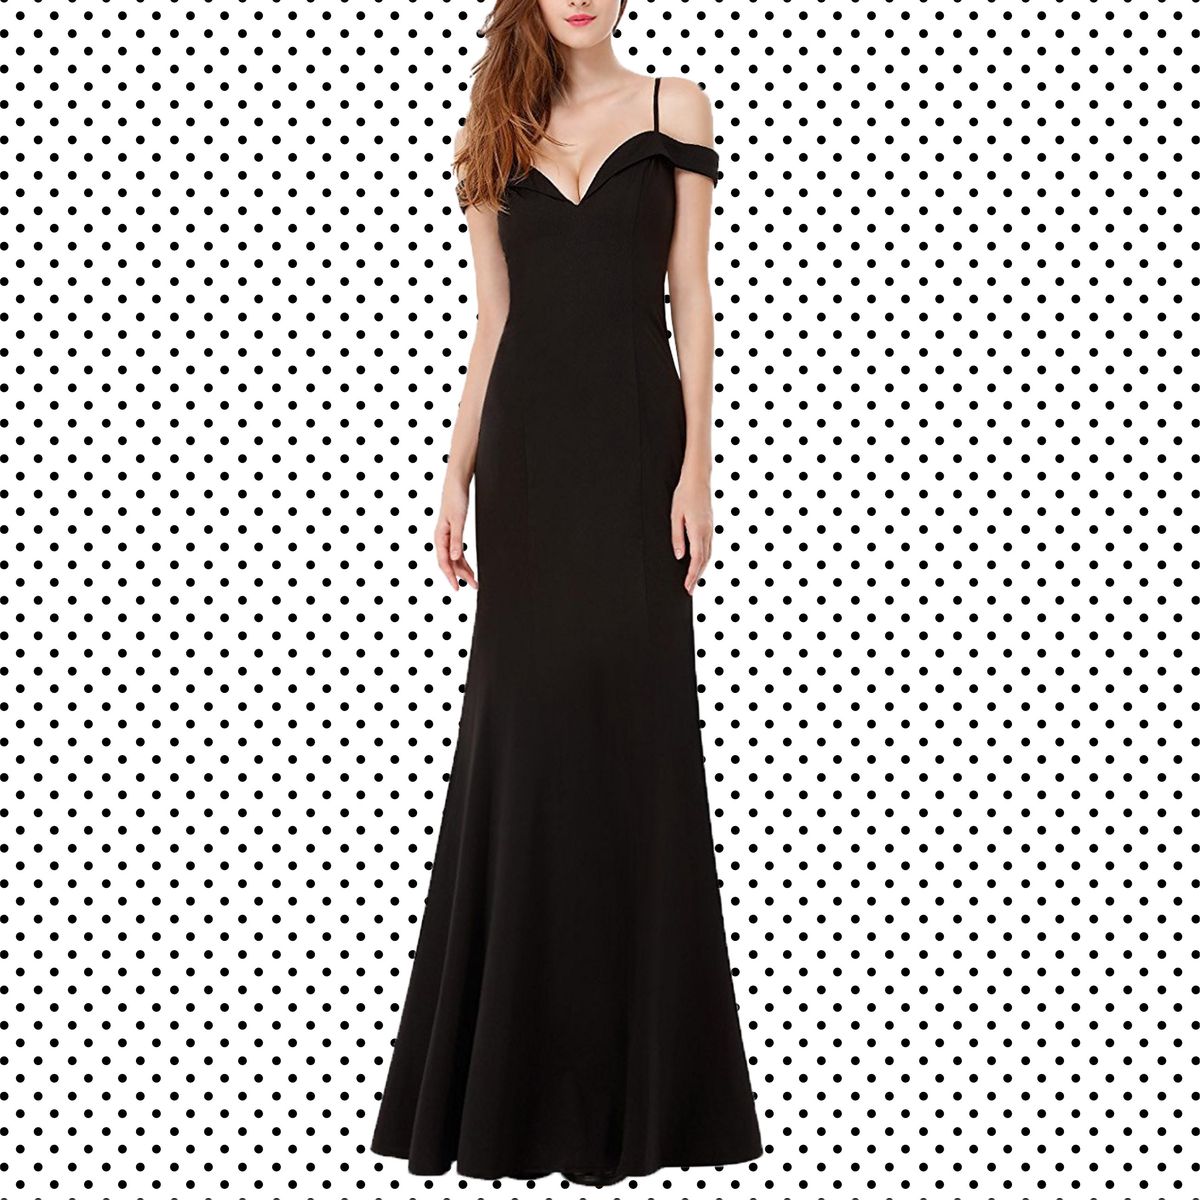 black dress wedding outfit